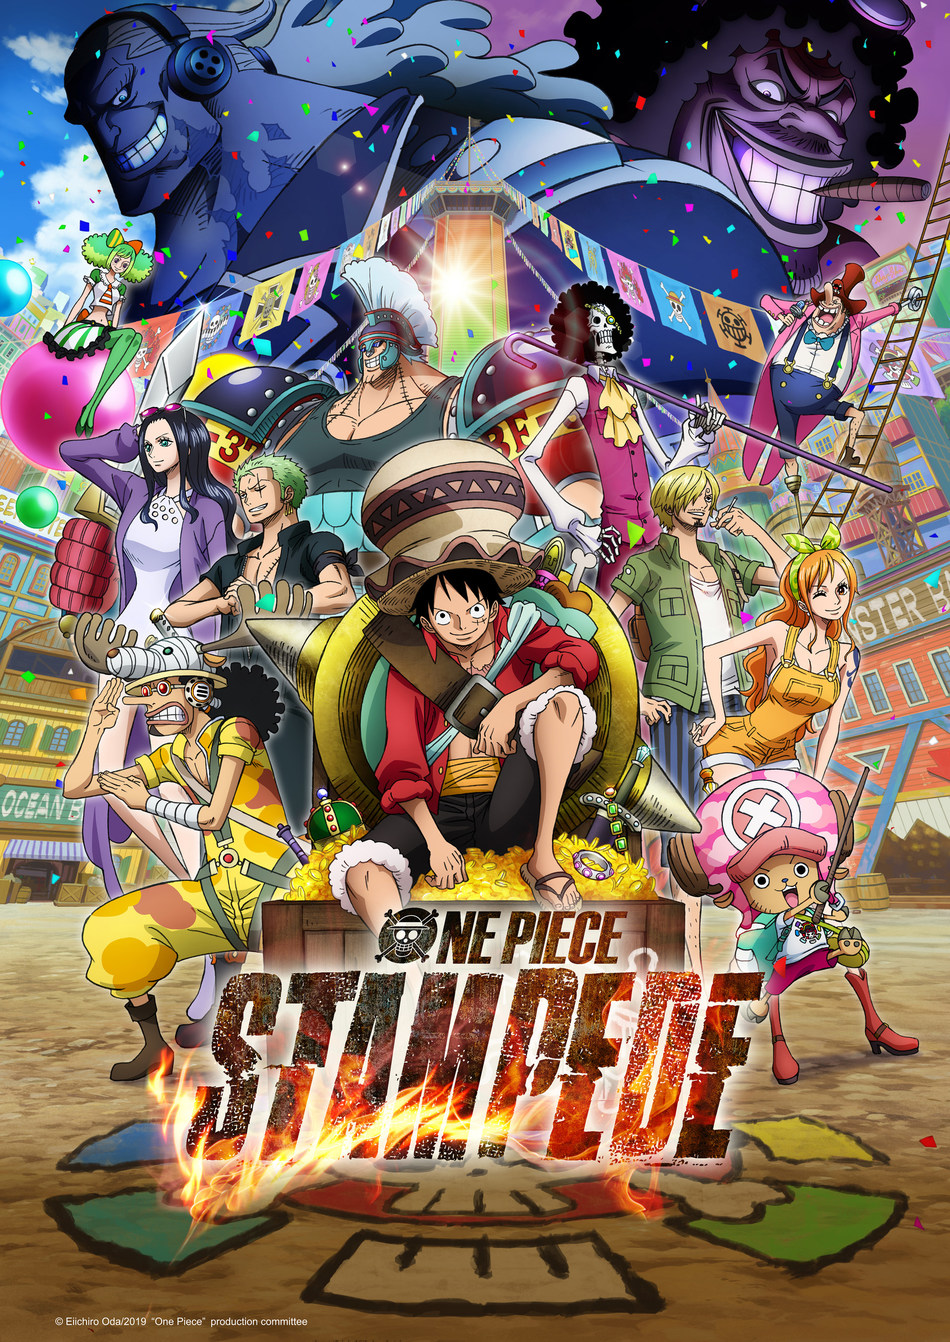 20th Anniversary Feature Film "One Piece Stampede